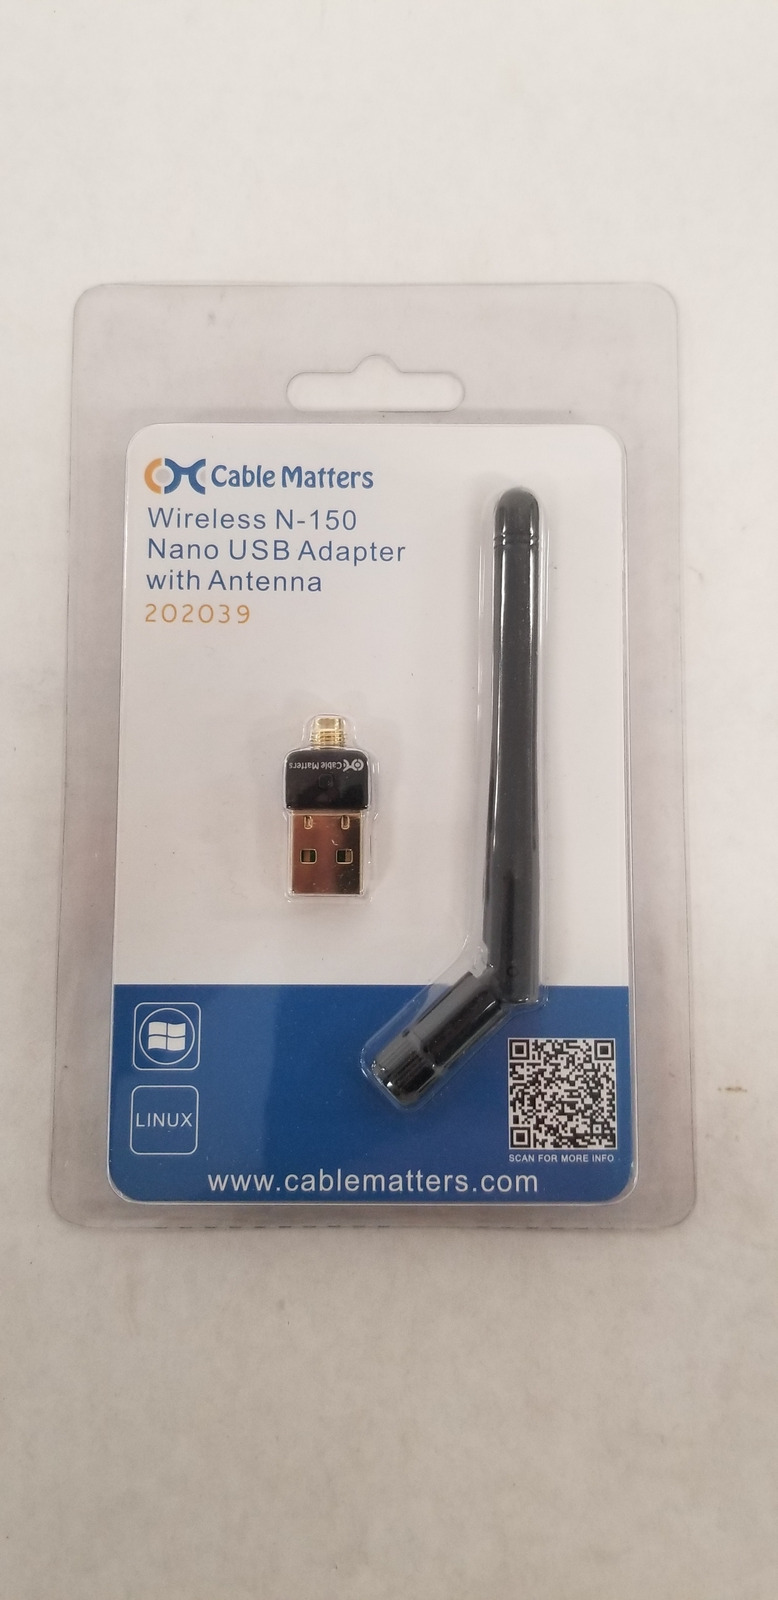 NEW Lot of 17 Cable Matters Wireless N-150 Nano USB Adapter w/Detachable Antenna